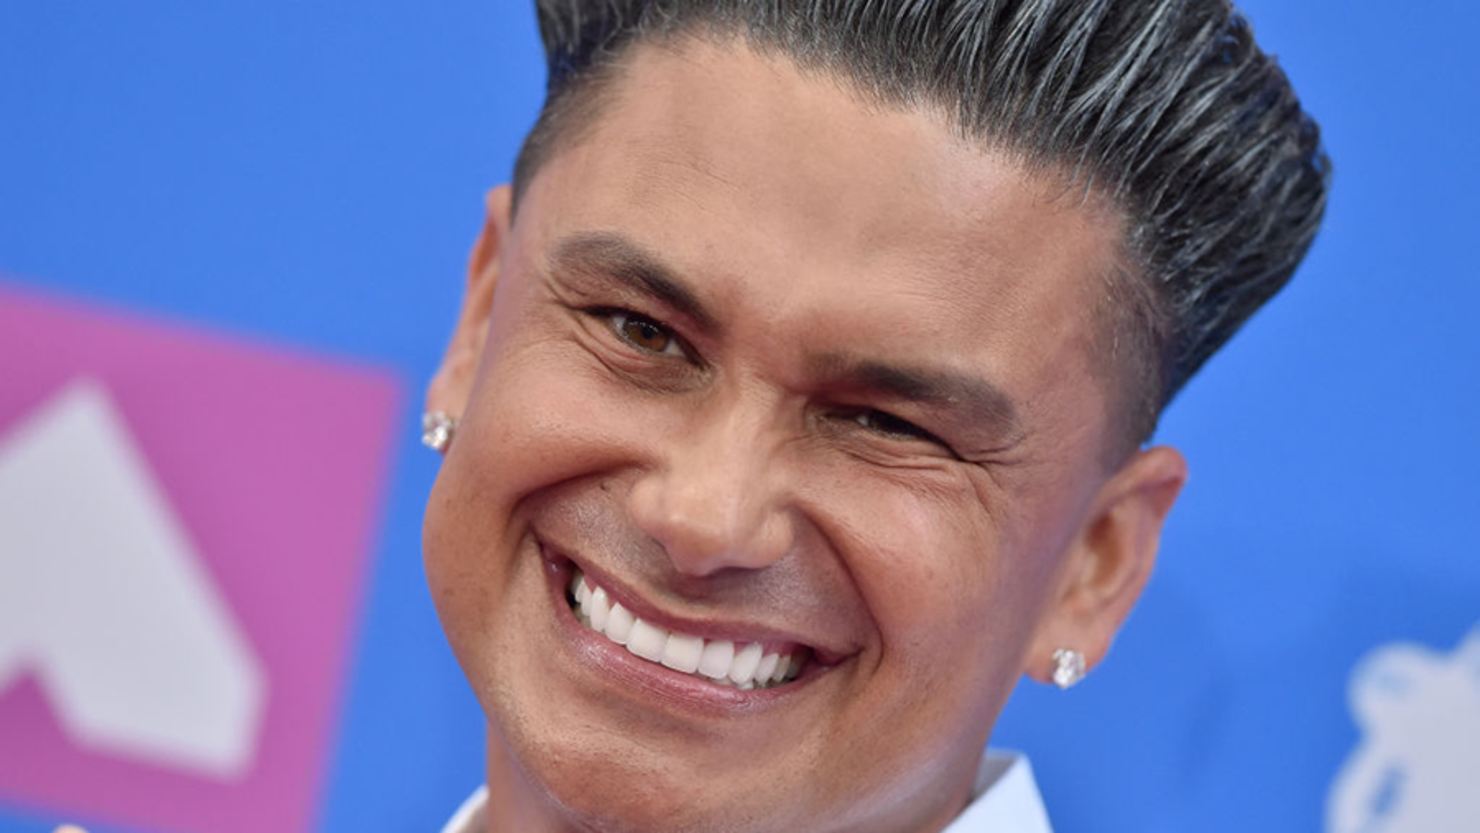 Pauly D Is Unrecognizable With No Hair Gel In New TikTok Video | iHeart